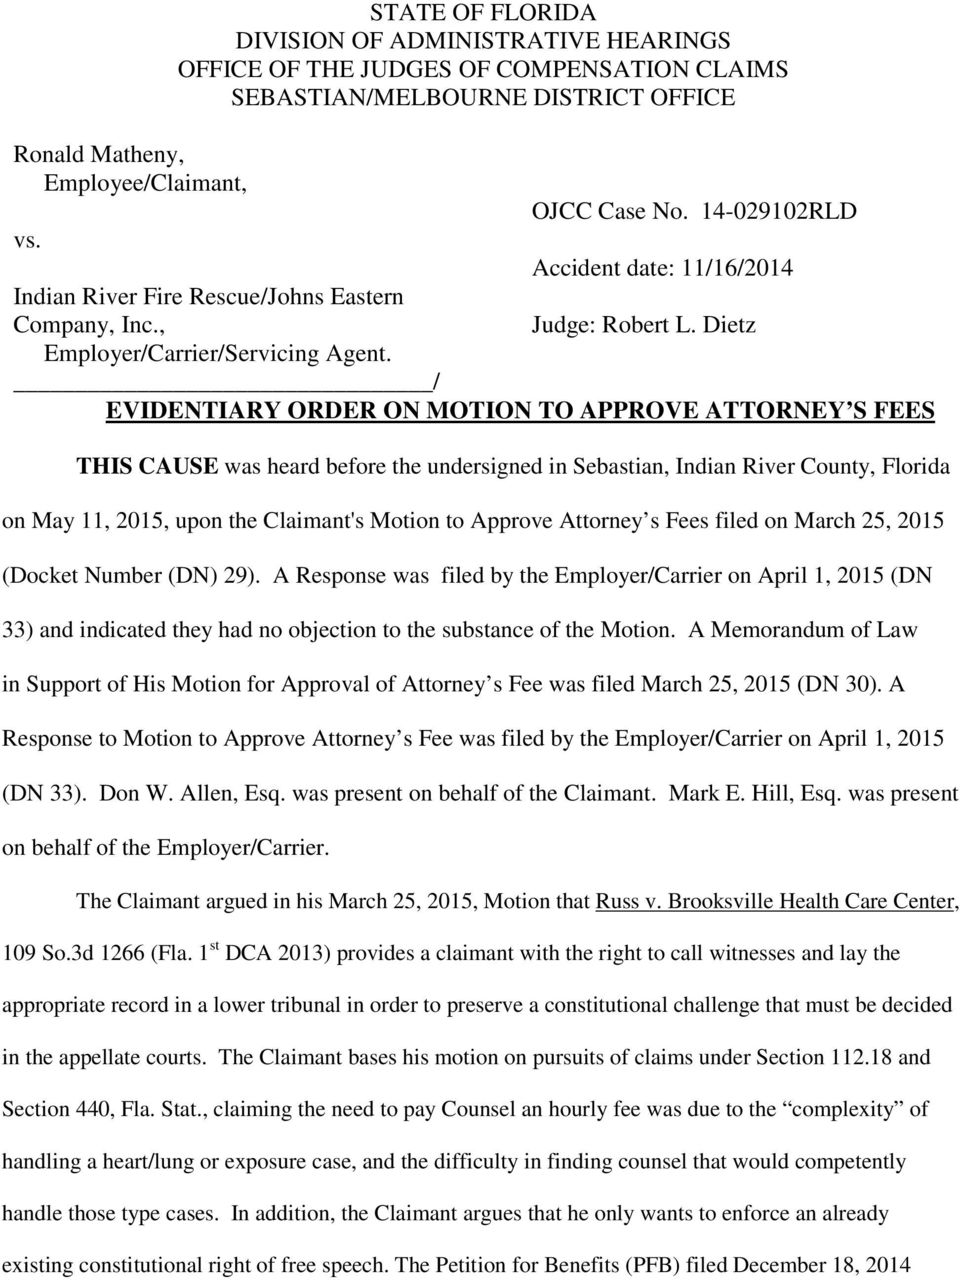 / EVIDENTIARY ORDER ON MOTION TO APPROVE ATTORNEY S FEES THIS CAUSE was heard before the undersigned in Sebastian, Indian River County, Florida on May 11, 2015, upon the Claimant's Motion to Approve